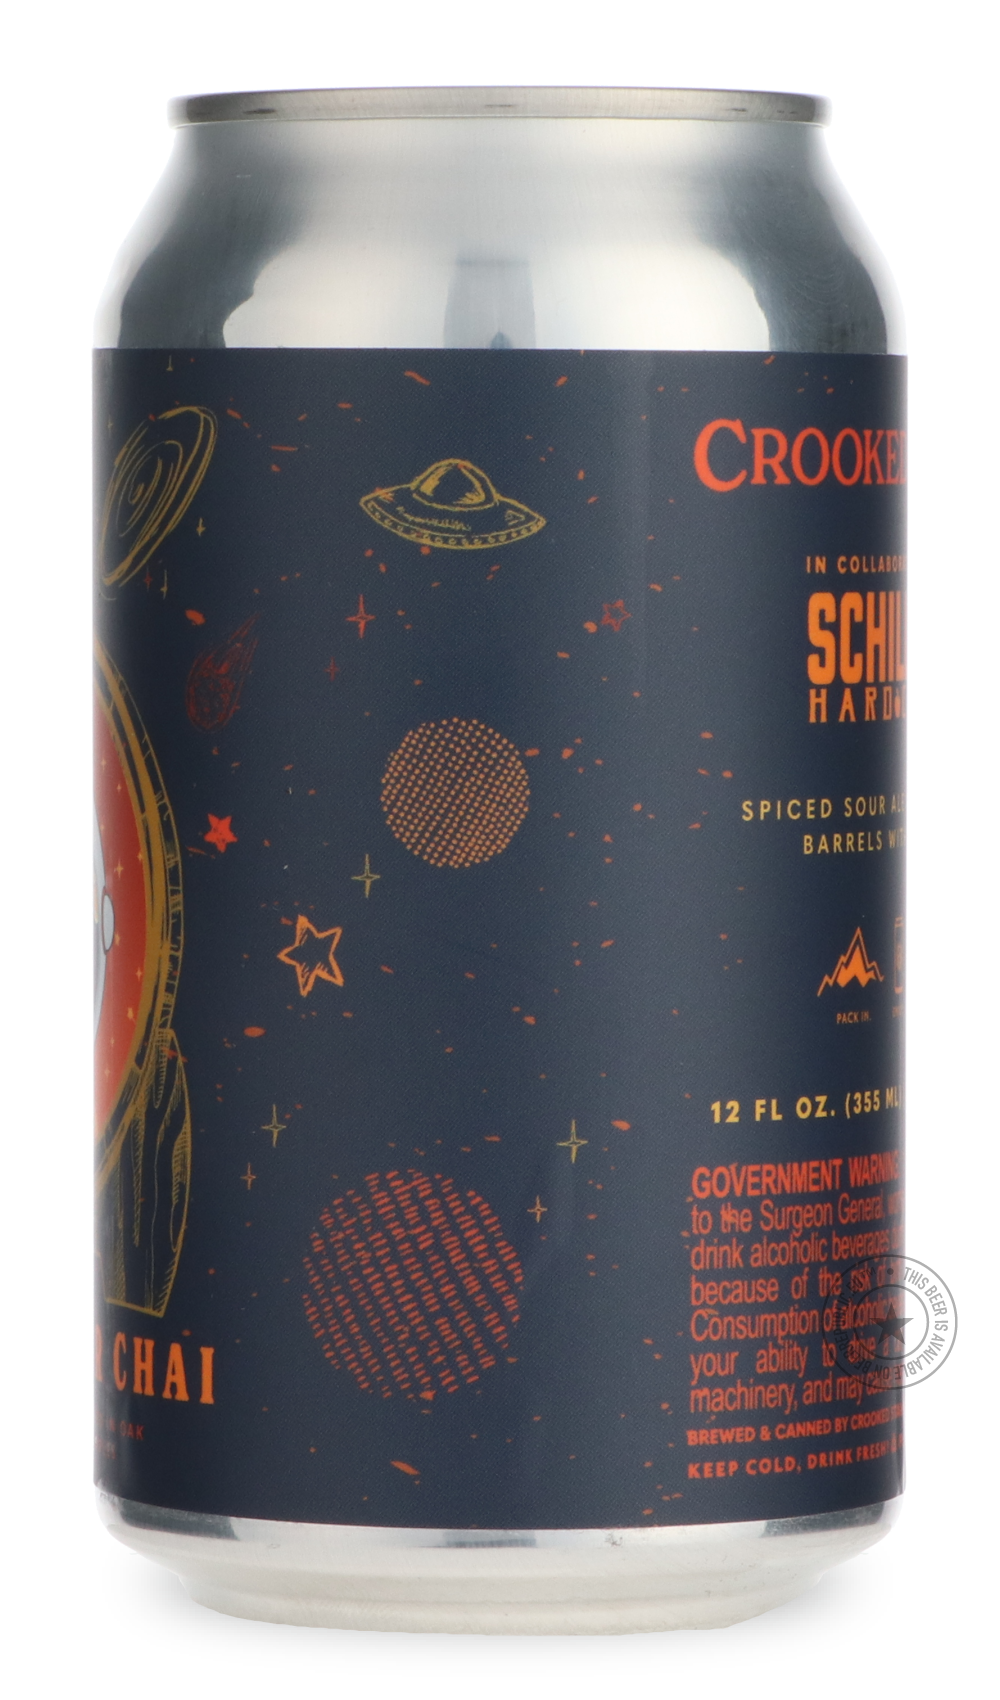 -Crooked Stave- Excelsior Chai-Sour / Wild & Fruity- Only @ Beer Republic - The best online beer store for American & Canadian craft beer - Buy beer online from the USA and Canada - Bier online kopen - Amerikaans bier kopen - Craft beer store - Craft beer kopen - Amerikanisch bier kaufen - Bier online kaufen - Acheter biere online - IPA - Stout - Porter - New England IPA - Hazy IPA - Imperial Stout - Barrel Aged - Barrel Aged Imperial Stout - Brown - Dark beer - Blond - Blonde - Pilsner - Lager - Wheat - We